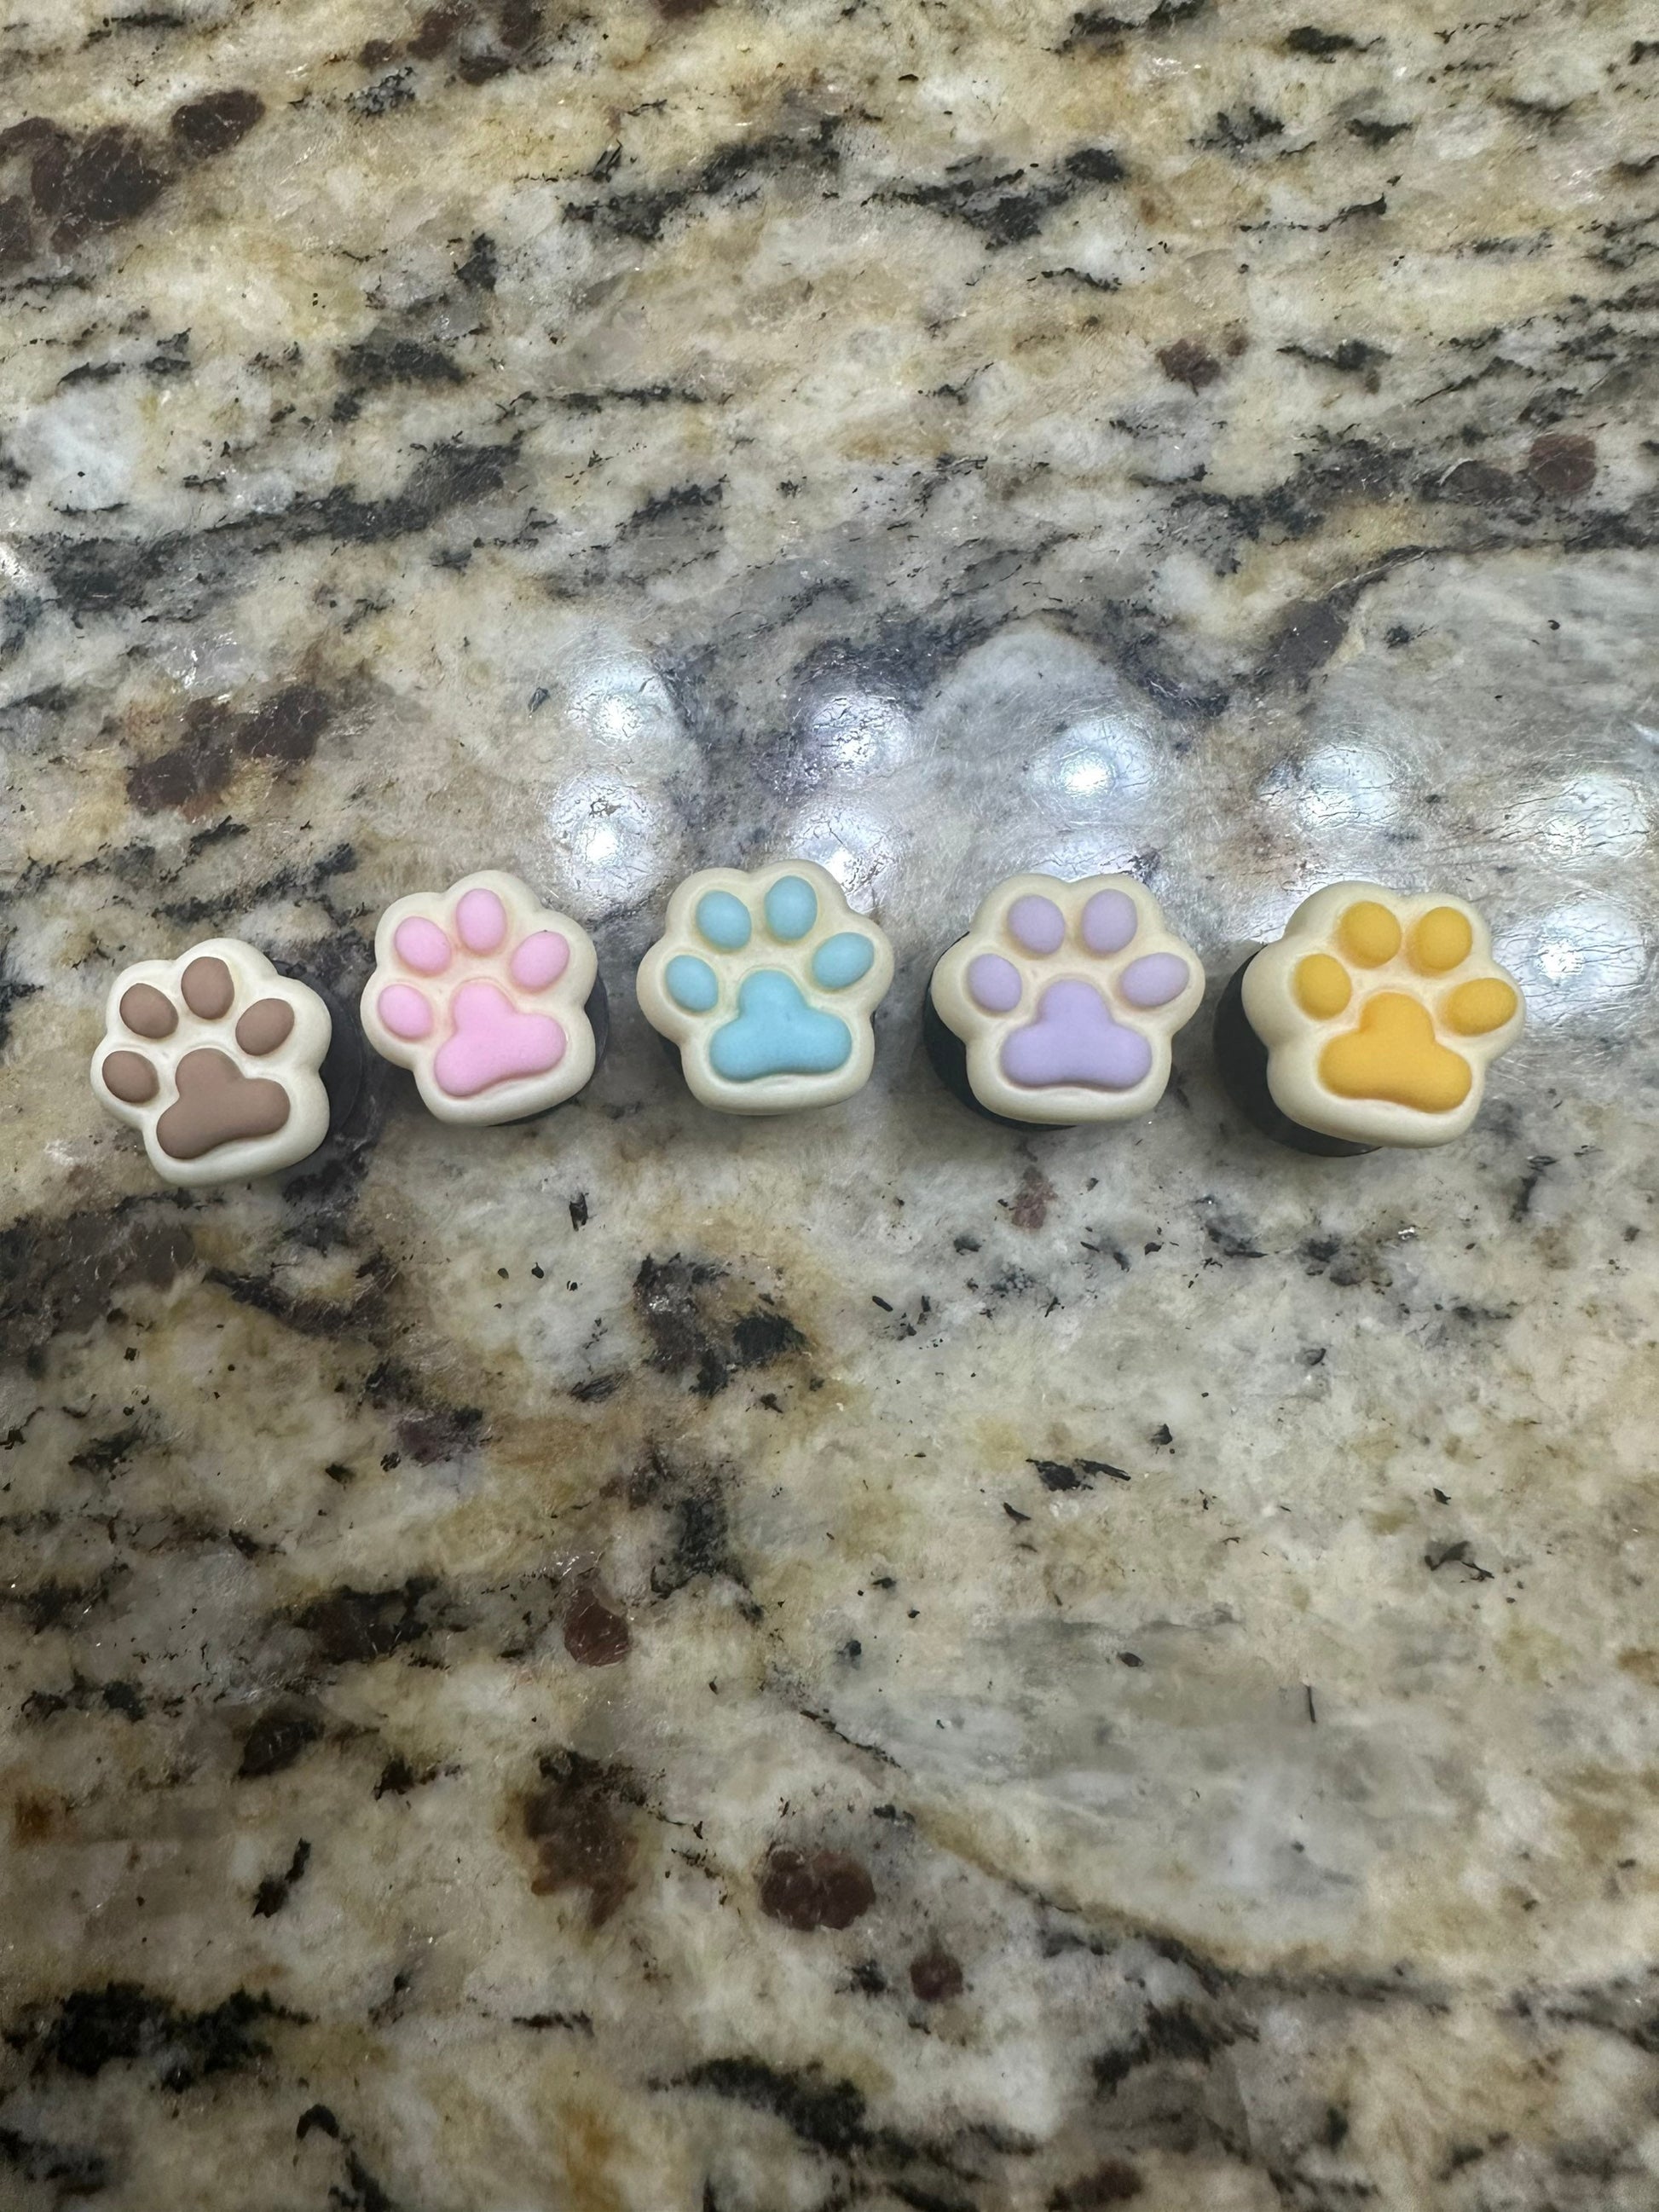 Dog charms| puppy shoe charms| rescue| husky| Akita| mutt | corgi| toe beans | paw print | shelter | puppy | doggy | cute | dog paws